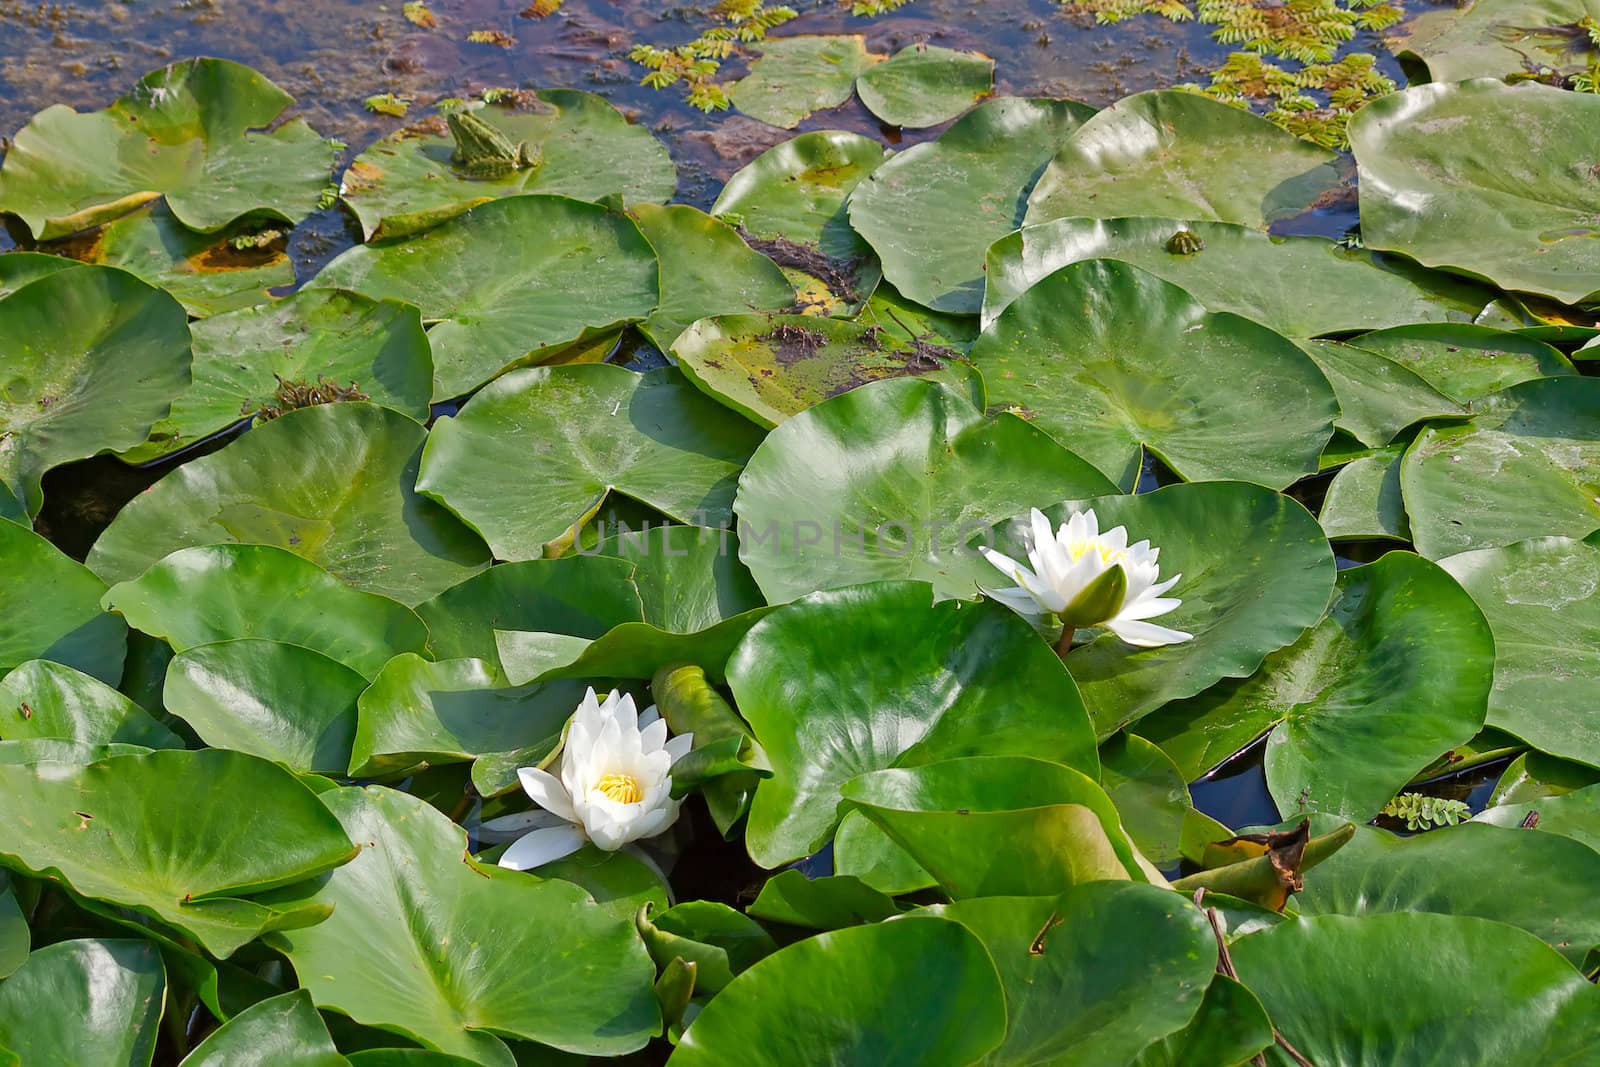 White waterlilys  on background of leaves in  pond.